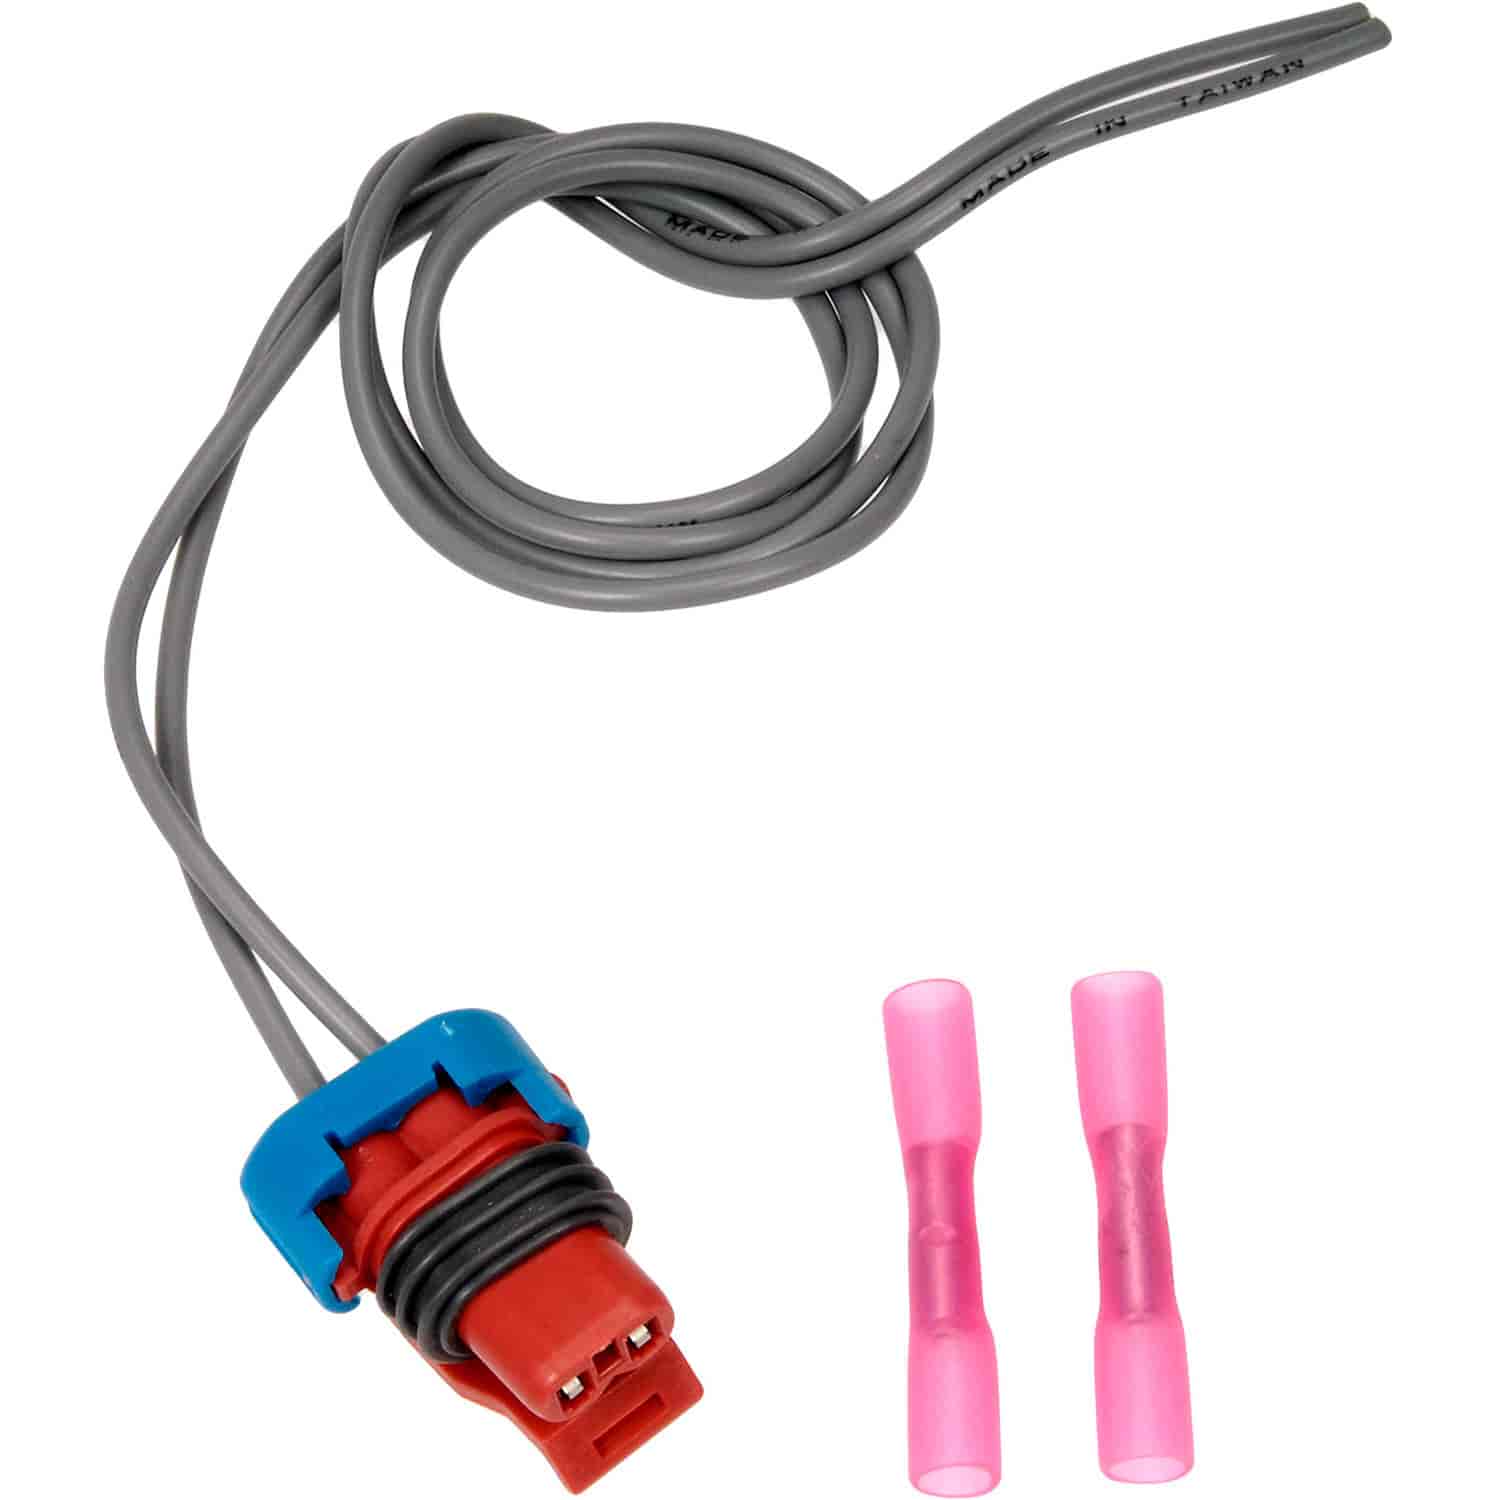 Pigtail -Evap. Canister Vent Valve Solenoid Red 2-way with Leads